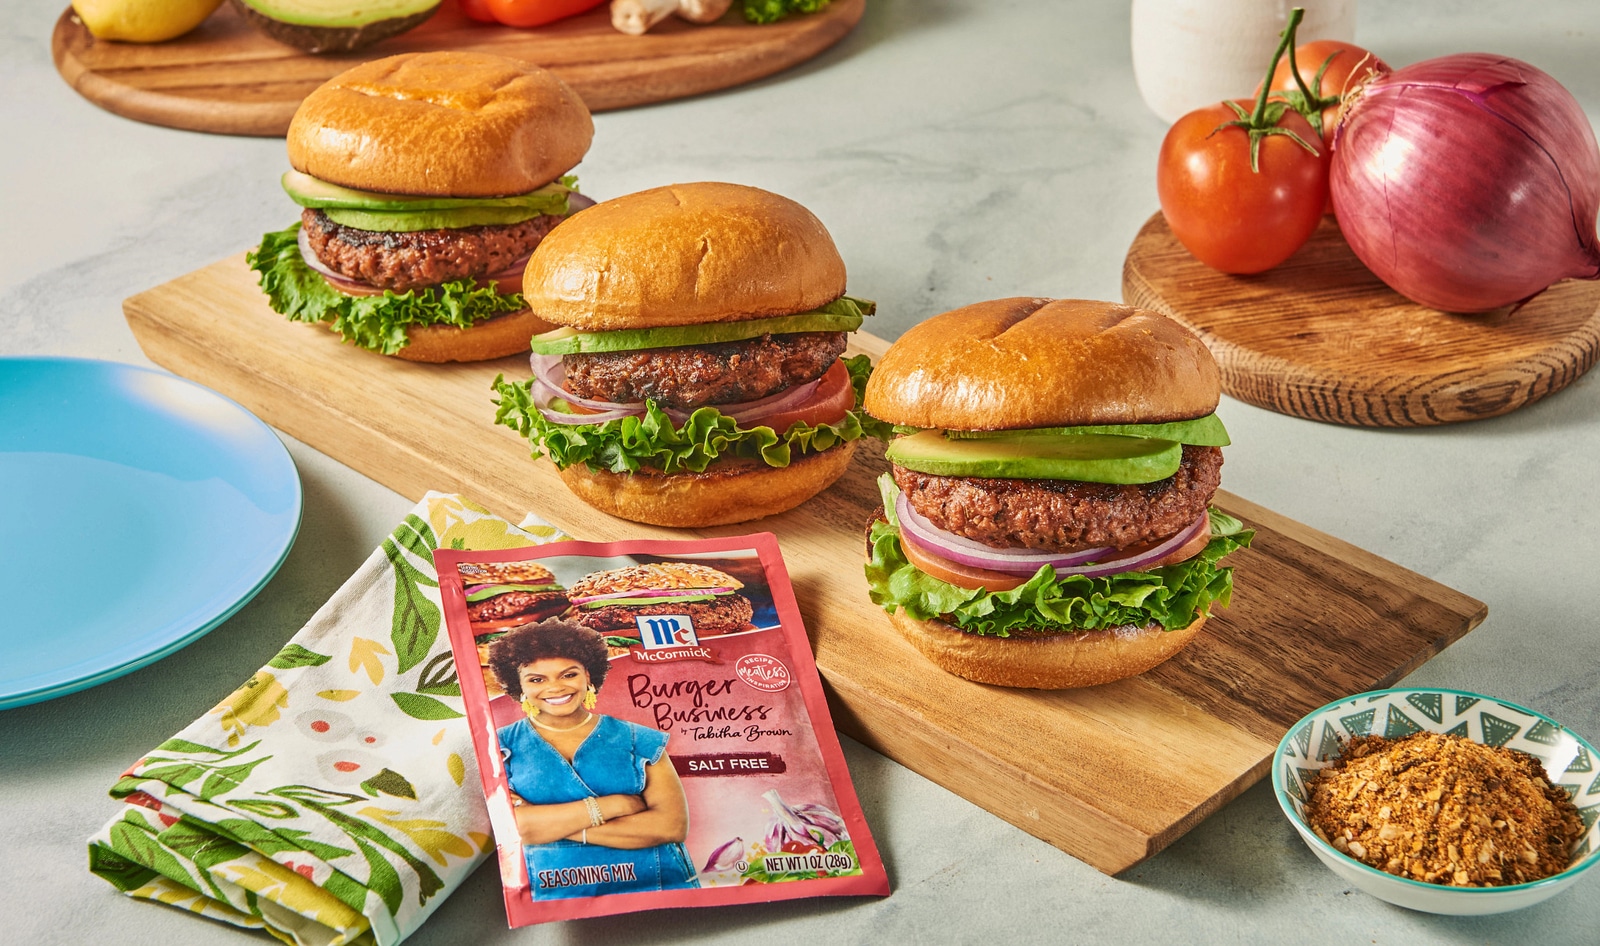 Tabitha Brown’s 5 New McCormick Seasonings Promise Bold Flavor, From Barbecue to Burgers